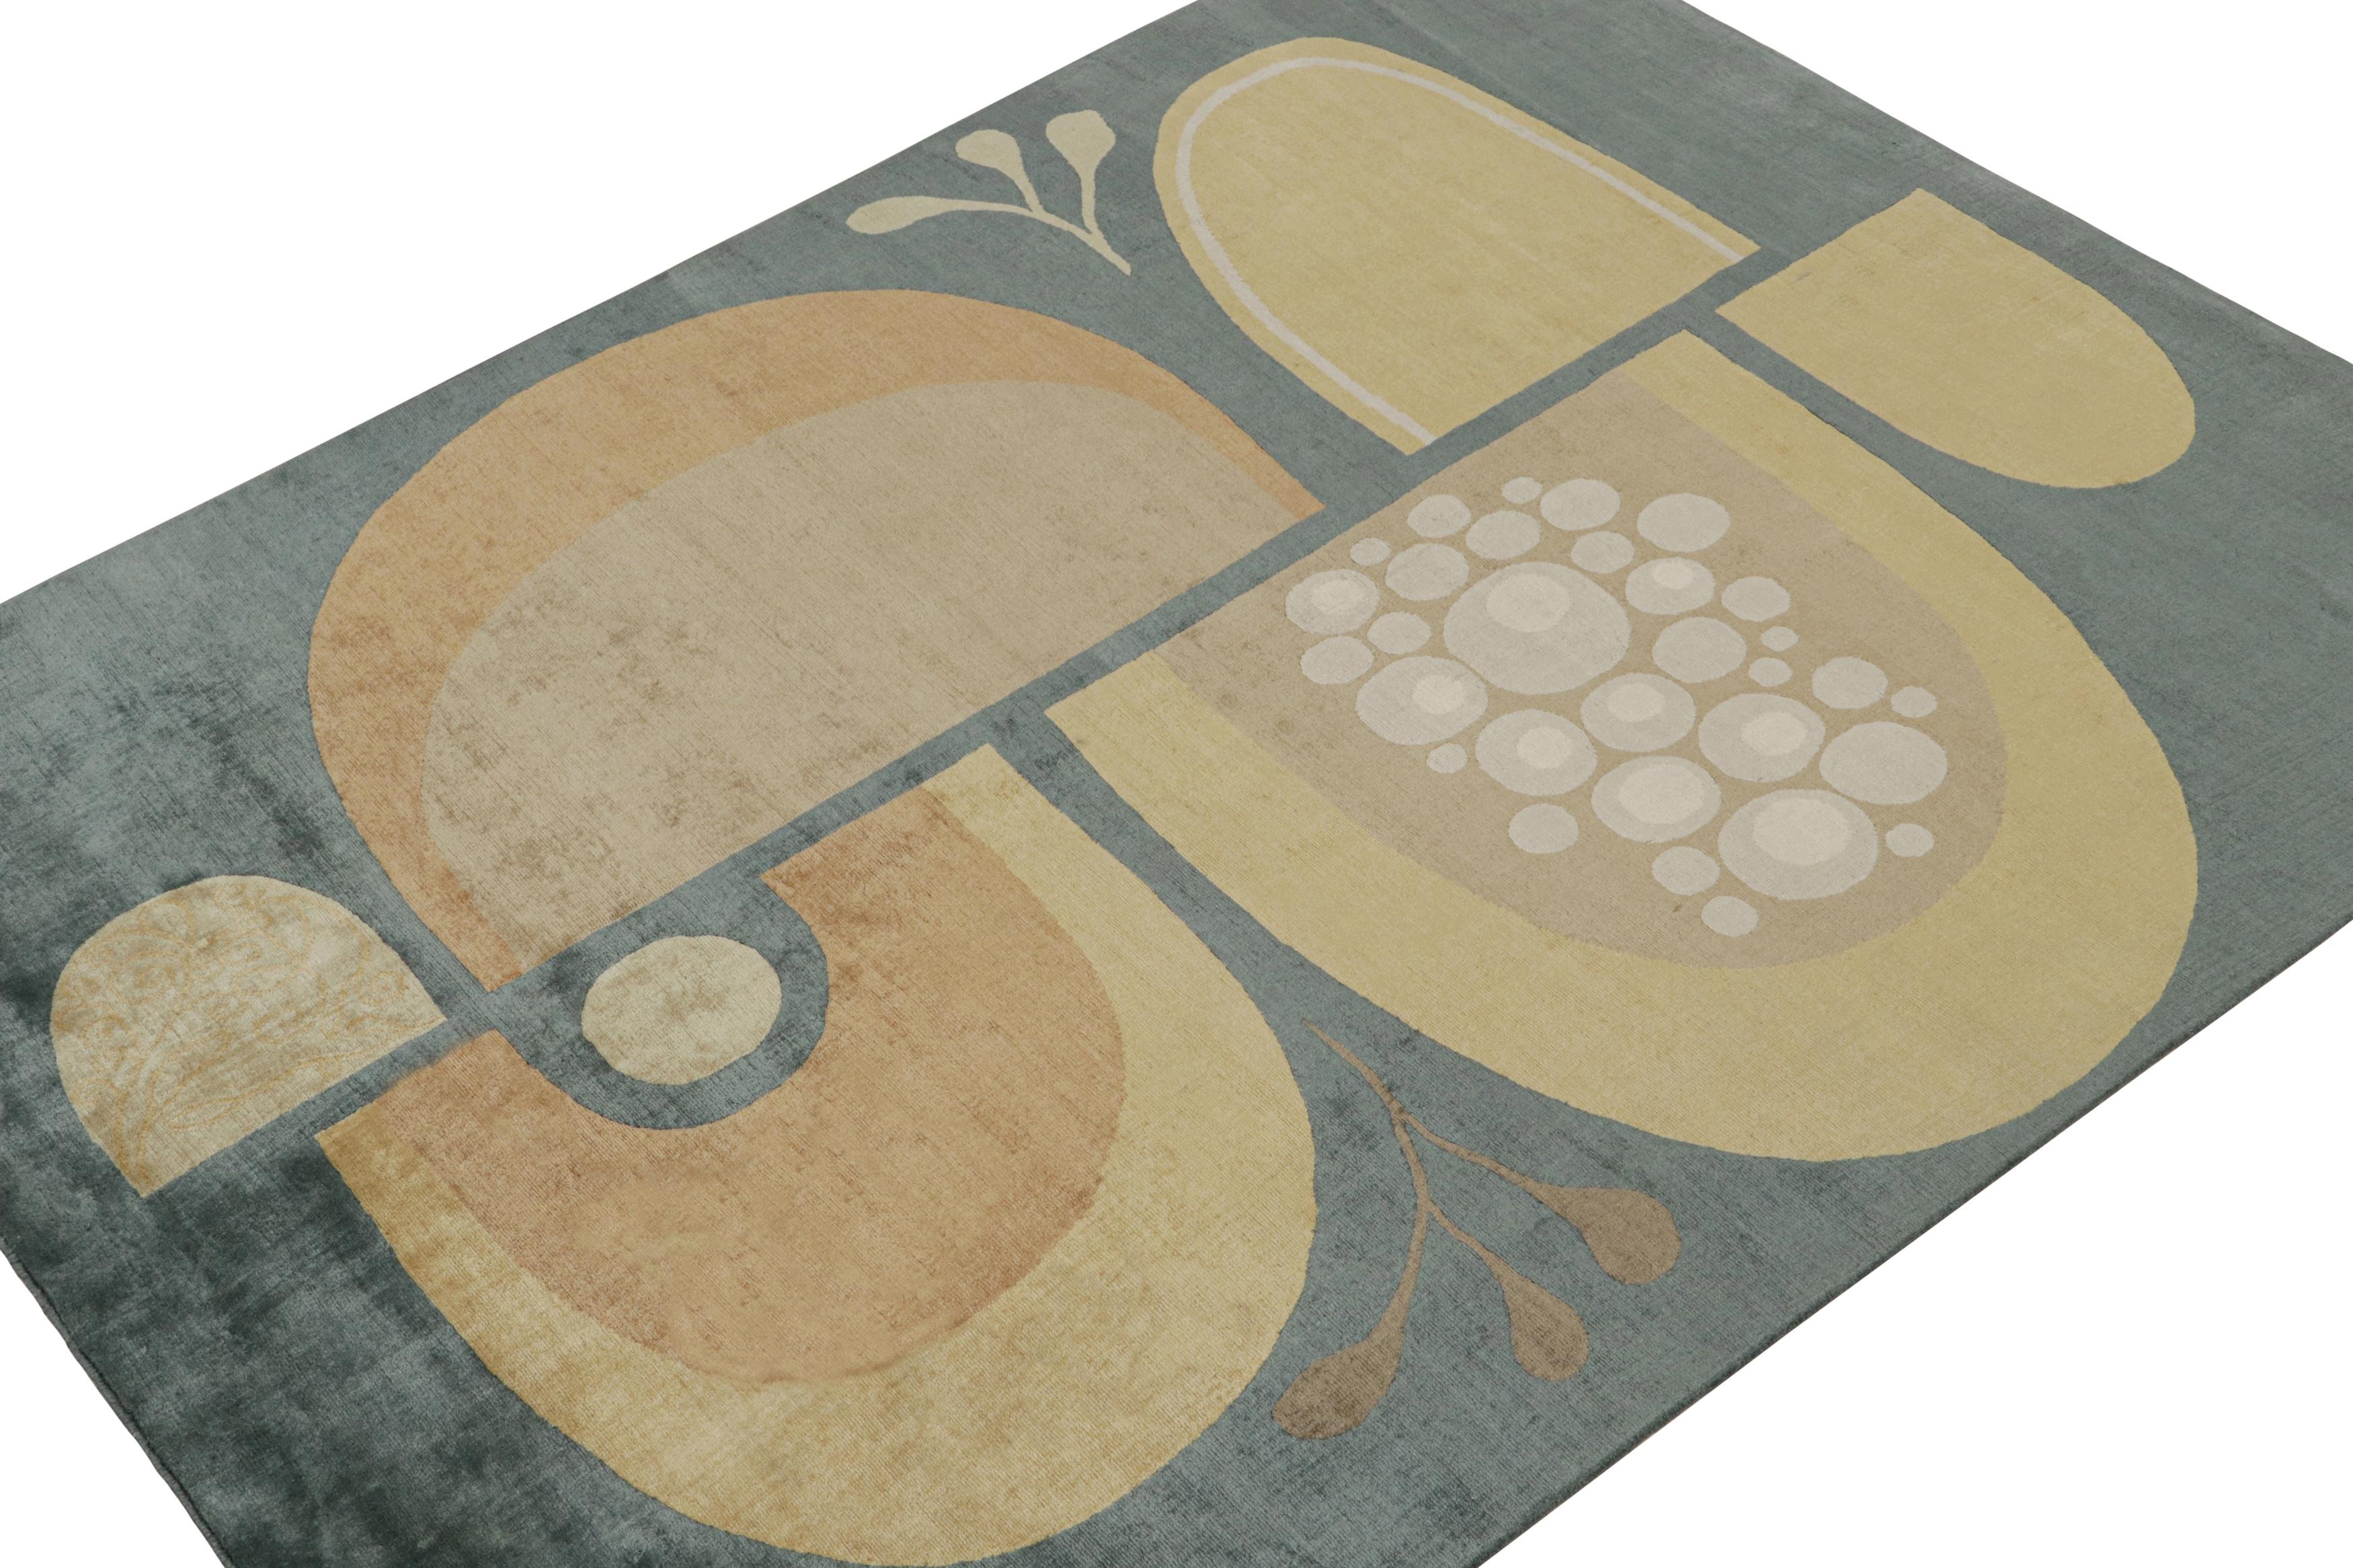 This custom rug design represents an exclusive artist collaboration between Jenn Ski and the Mid-Century Modern rug collection. Inspired by 1950s styles, this collection explores atomic age, postmodernist, maximalist and art rug sensibilities